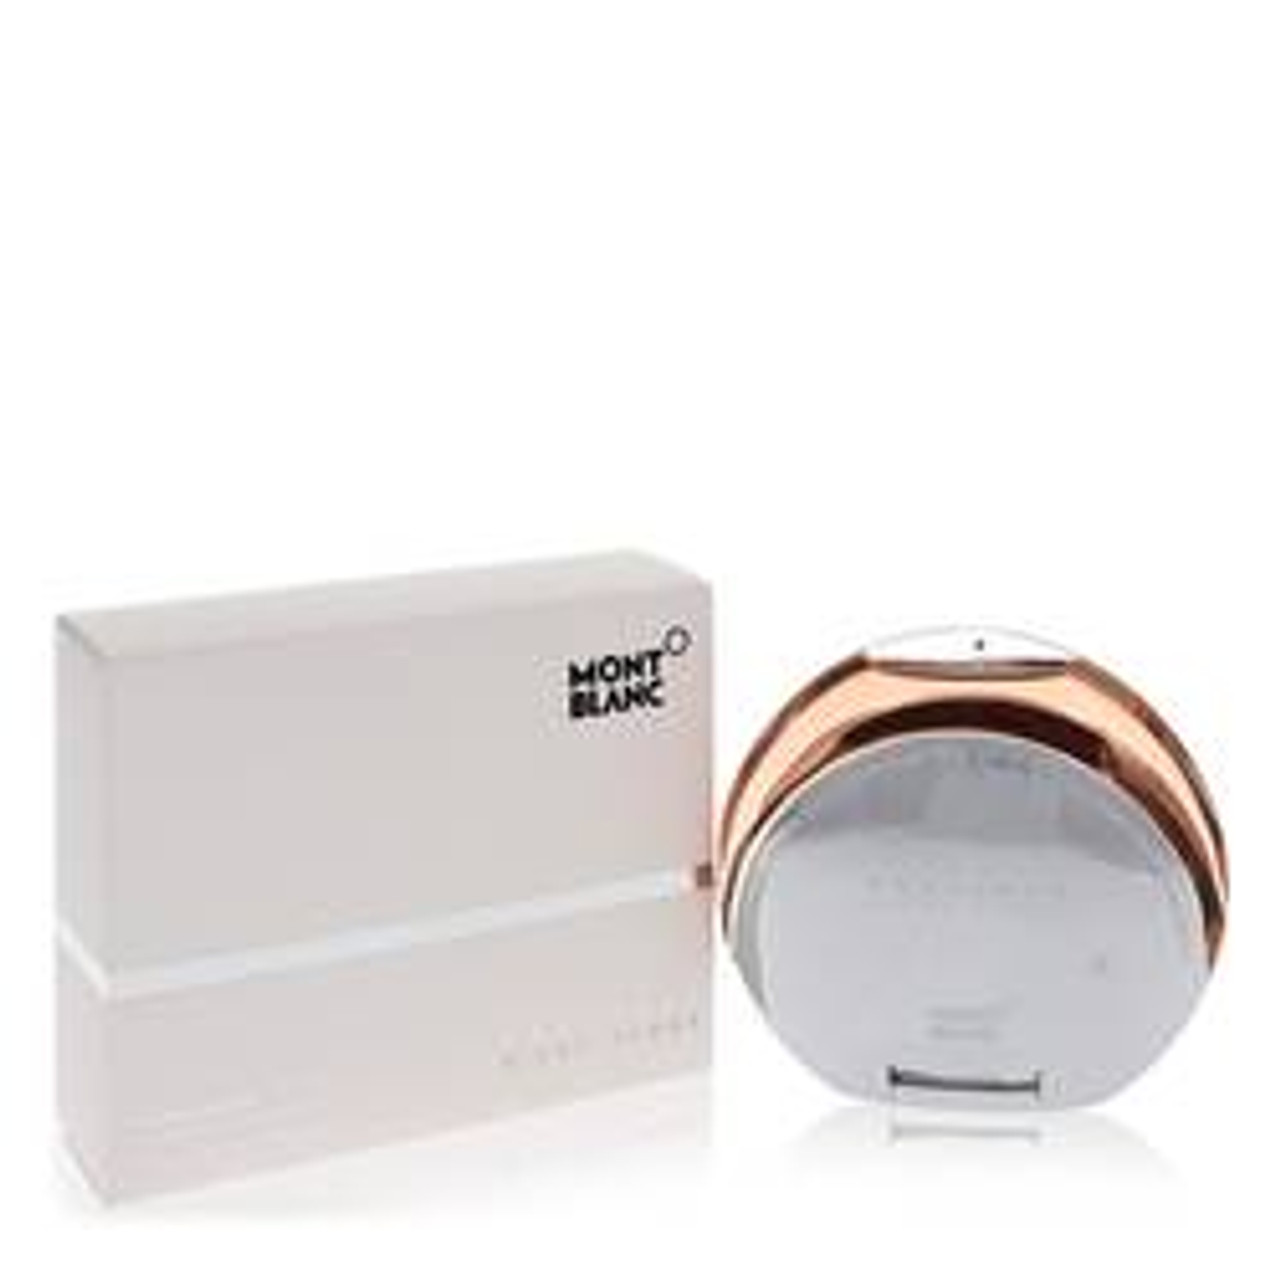 Presence Perfume By Mont Blanc Eau De Toilette Spray 2.5 oz for Women - [From 83.00 - Choose pk Qty ] - *Ships from Miami